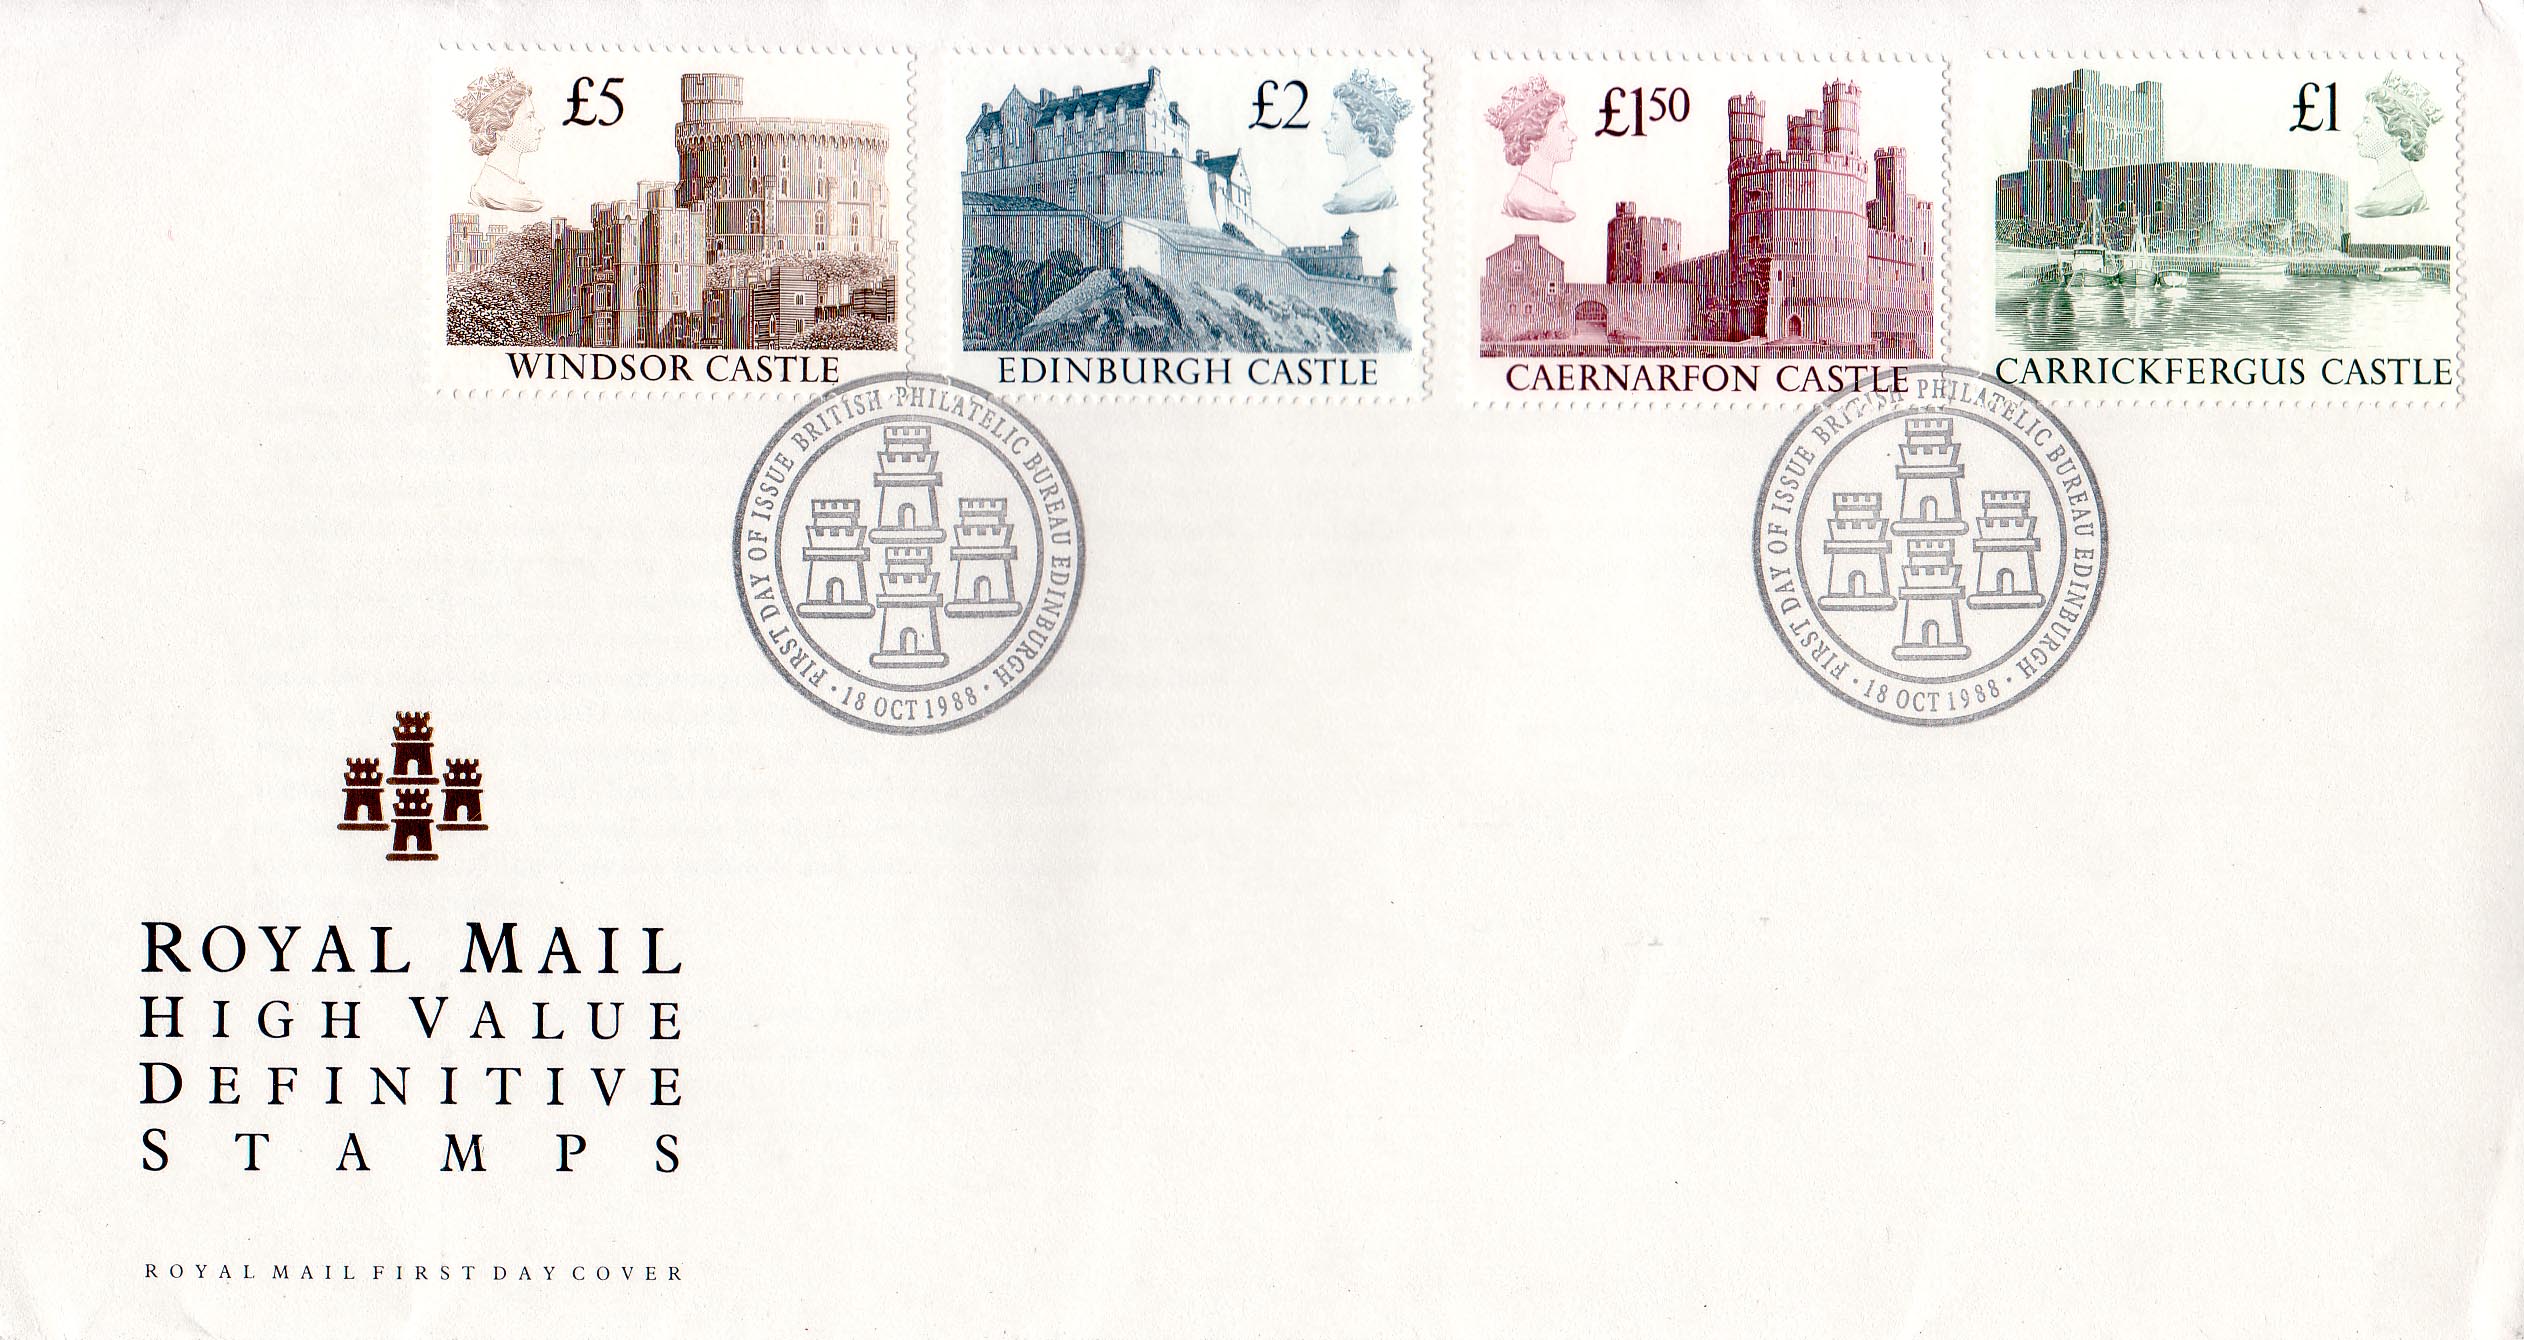 Great Britain - Scott #1230-1233 (1988) first day cover; image sourced from https://www.collectgbstamps.co.uk/default.asp